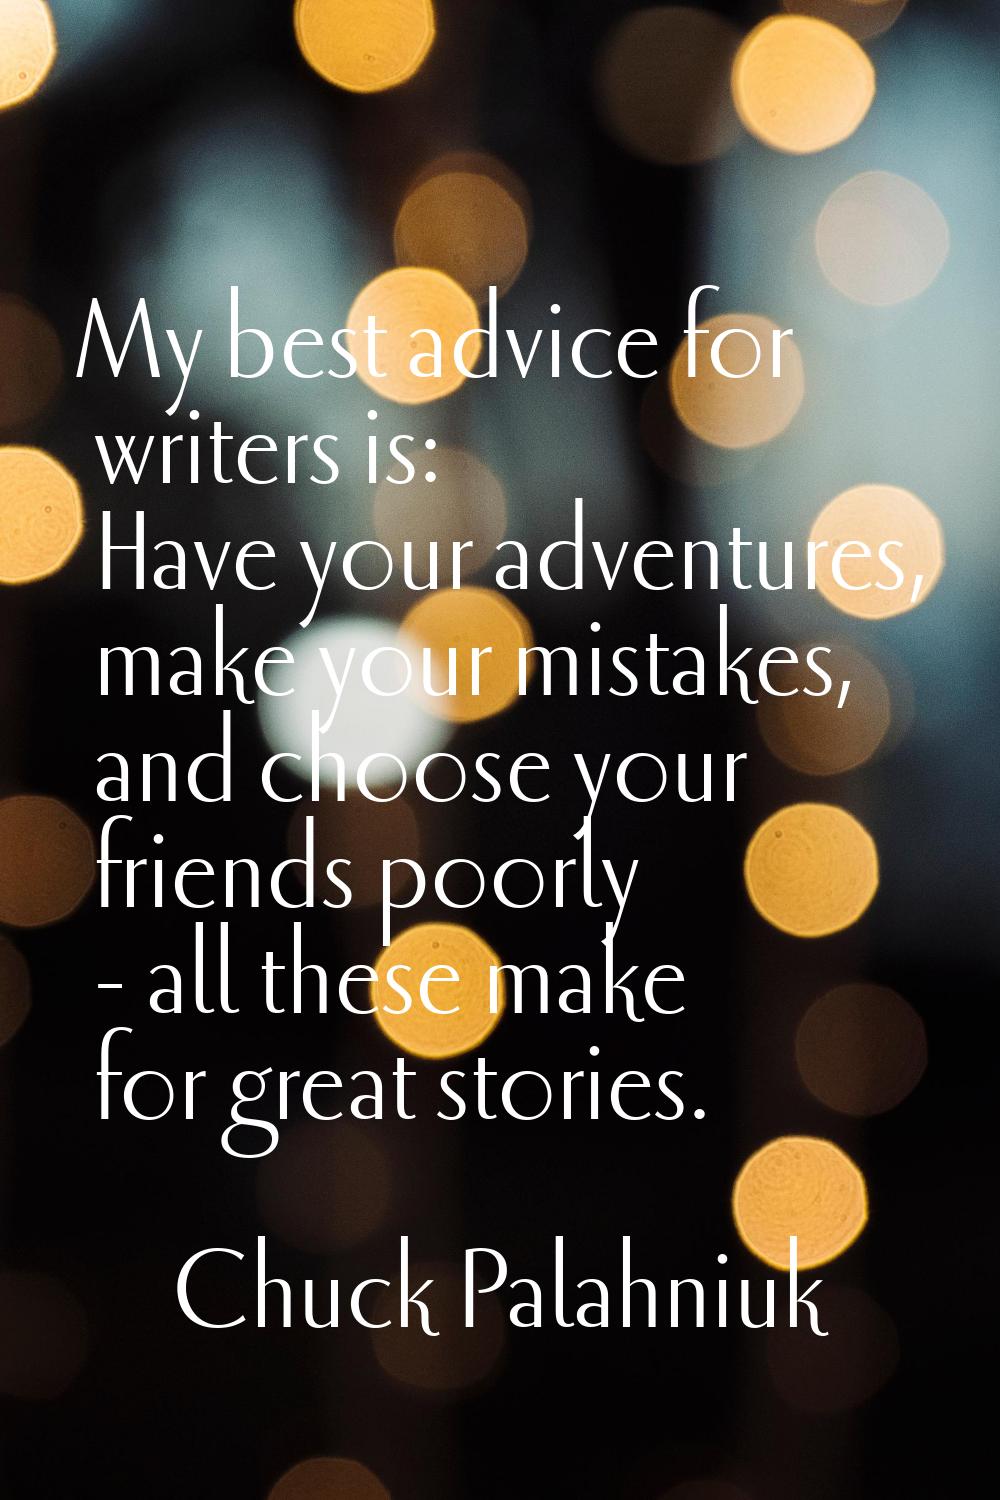 My best advice for writers is: Have your adventures, make your mistakes, and choose your friends po